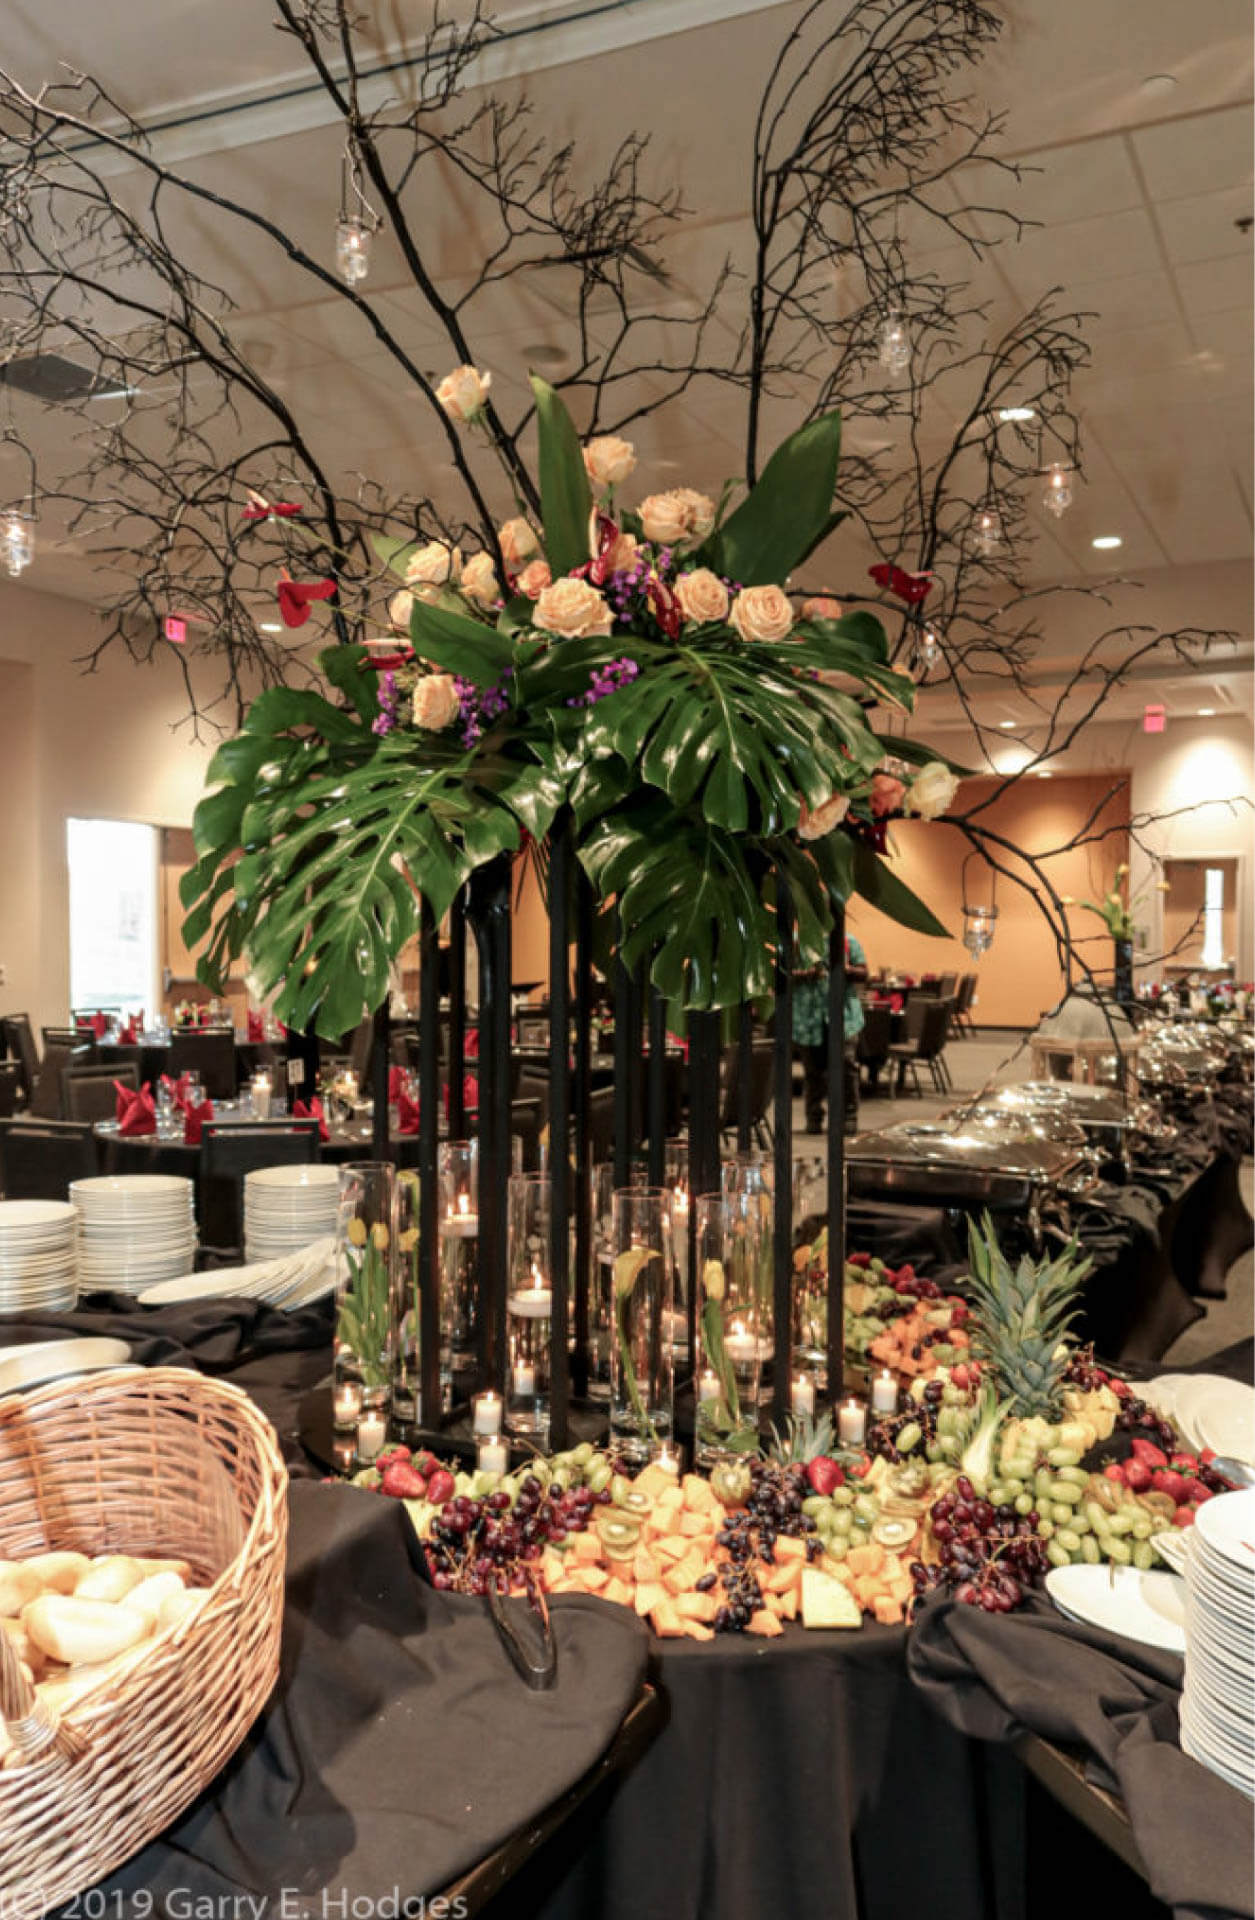 fruit display and decorations at Rocky Mount Event Center